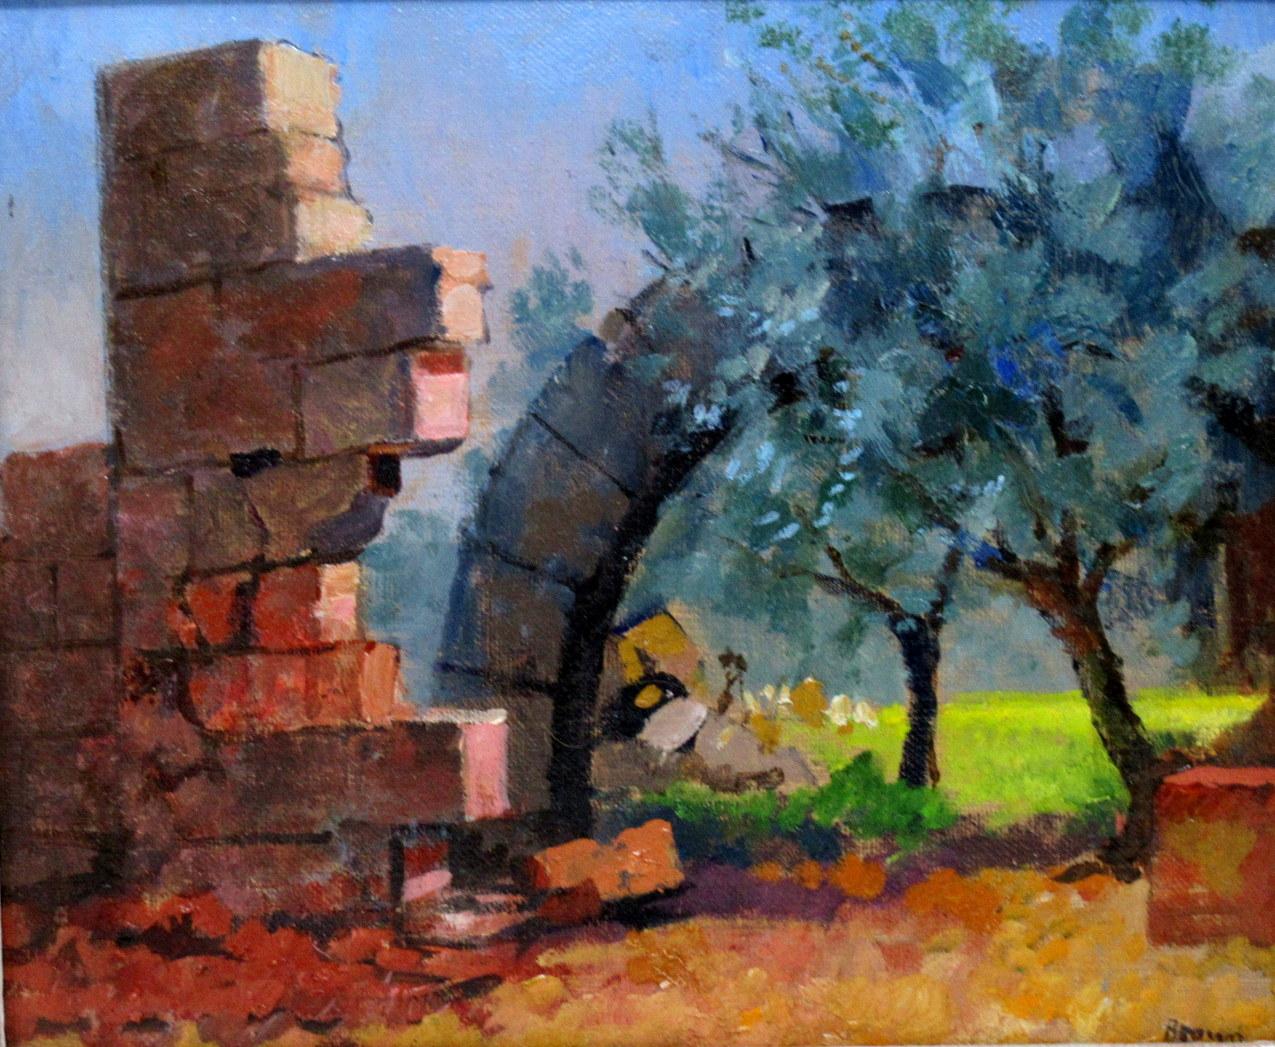 Charming oil on canvas by English Postwar and contemporary painter Bob Brown N.E.A.C. who was born in 1964, entitled “Ruin Arch” and is one of his works from his travels in Syria.

Member of the New English Arts Club. 

This vintage view depicts